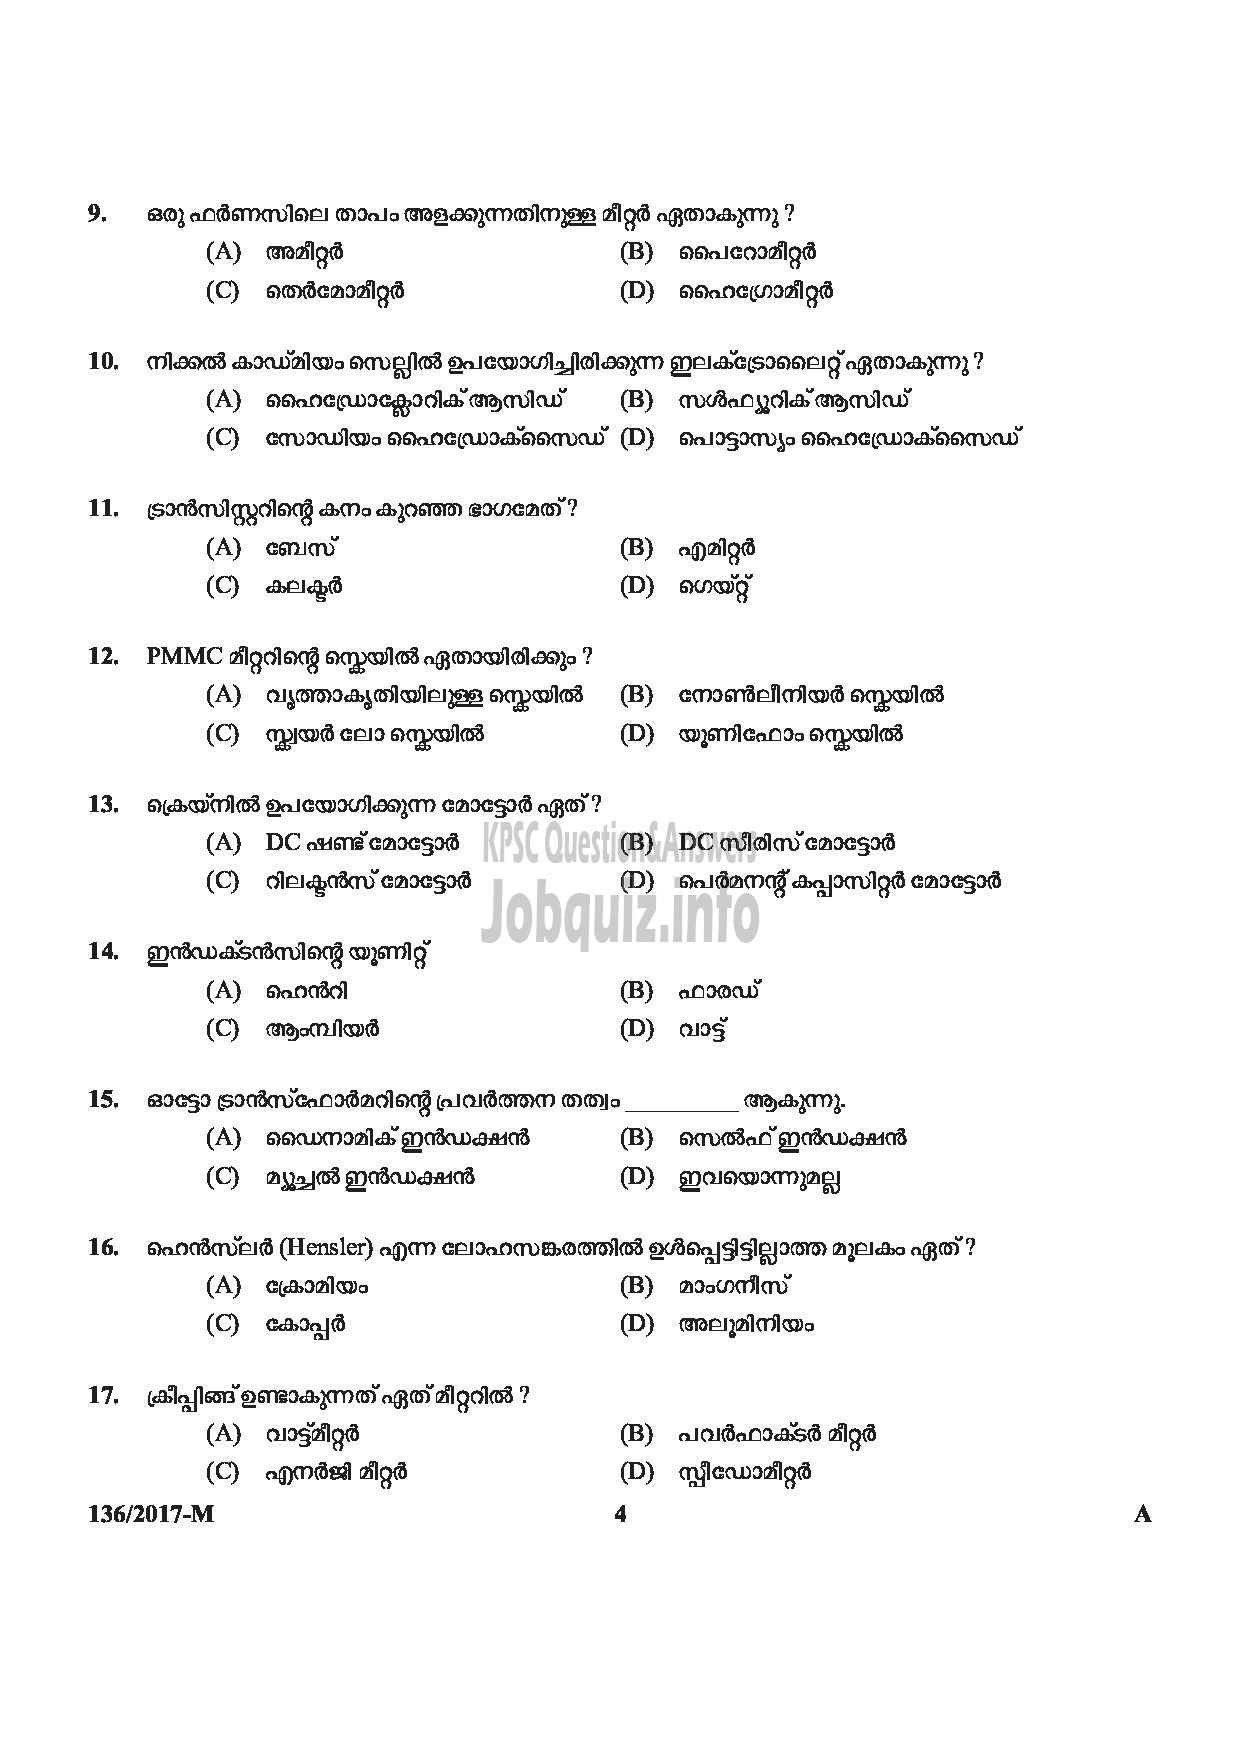 Kerala PSC Question Paper - METER READER/SPOT BILLER SPECIAL RECRUITMENT FROM AMONG ST ONLY MEDIUM OF QUESTION MALAYALAM-4